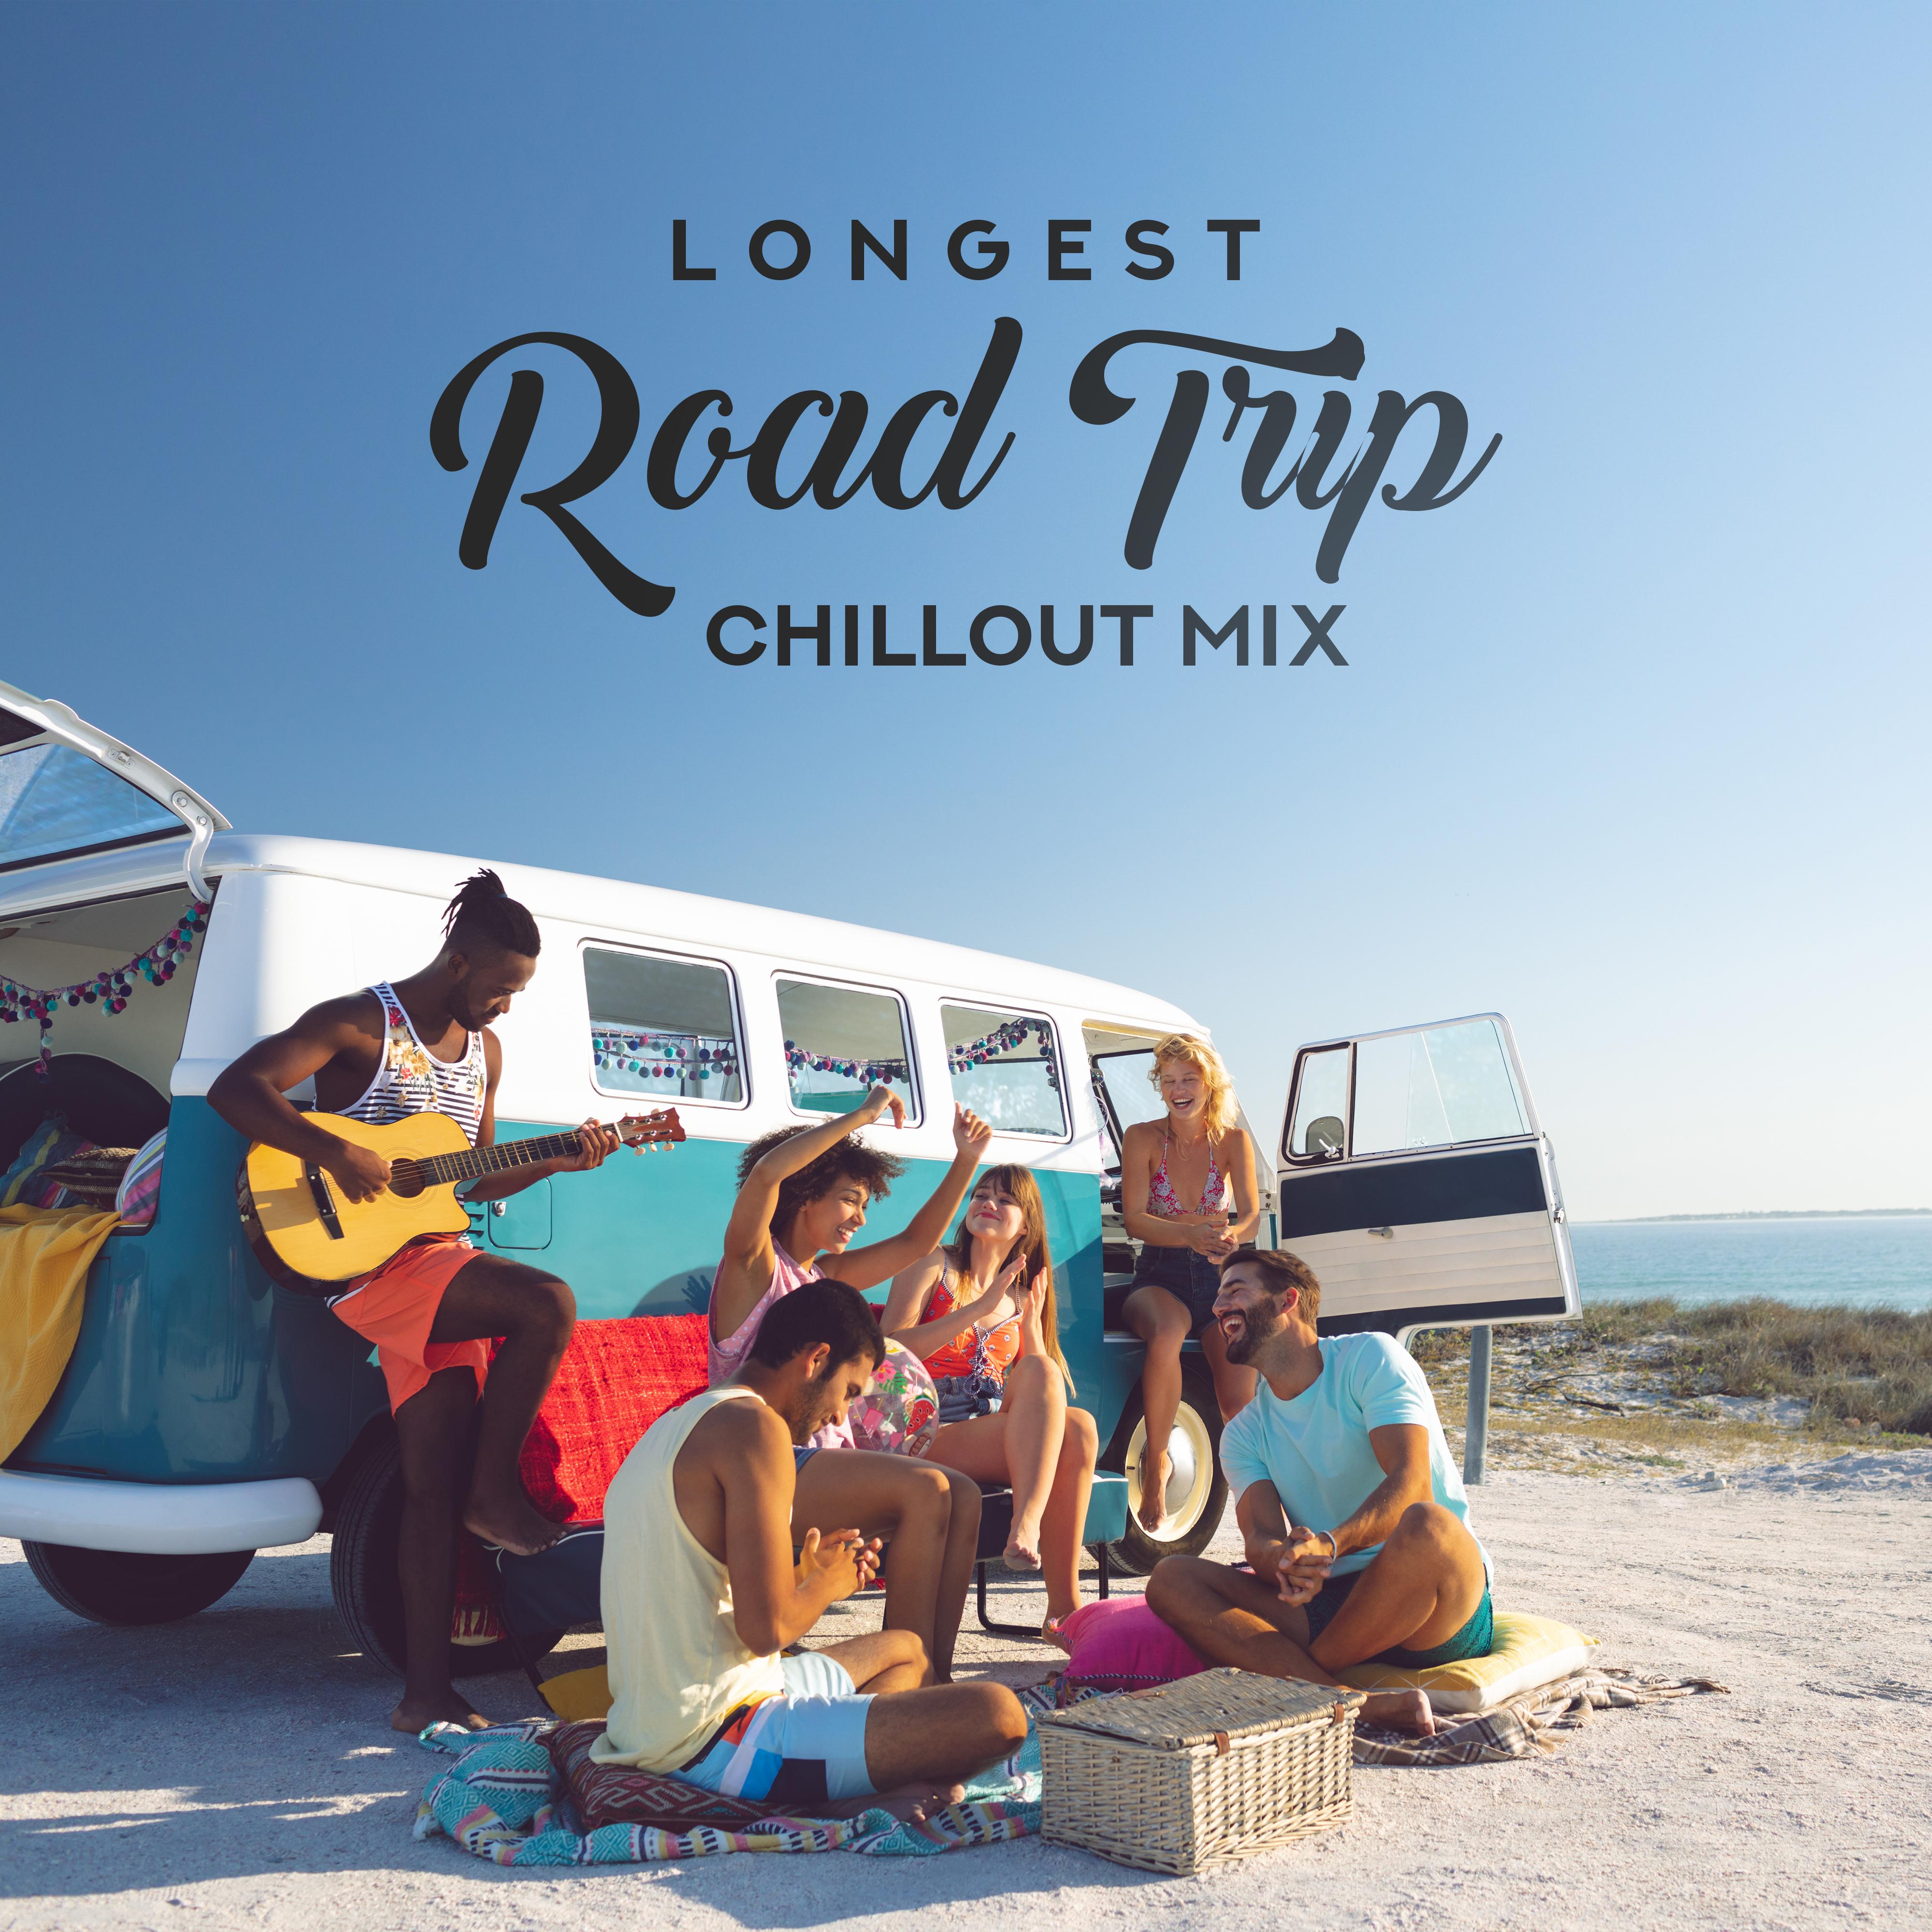 Longest Road Trip Chillout Mix  Compilation of Relaxing Chill Out 2019 Car Muisc for Long Vacation Trip, Smooth Deep Beats  Soft Melodies, Songs to Focus on the Road